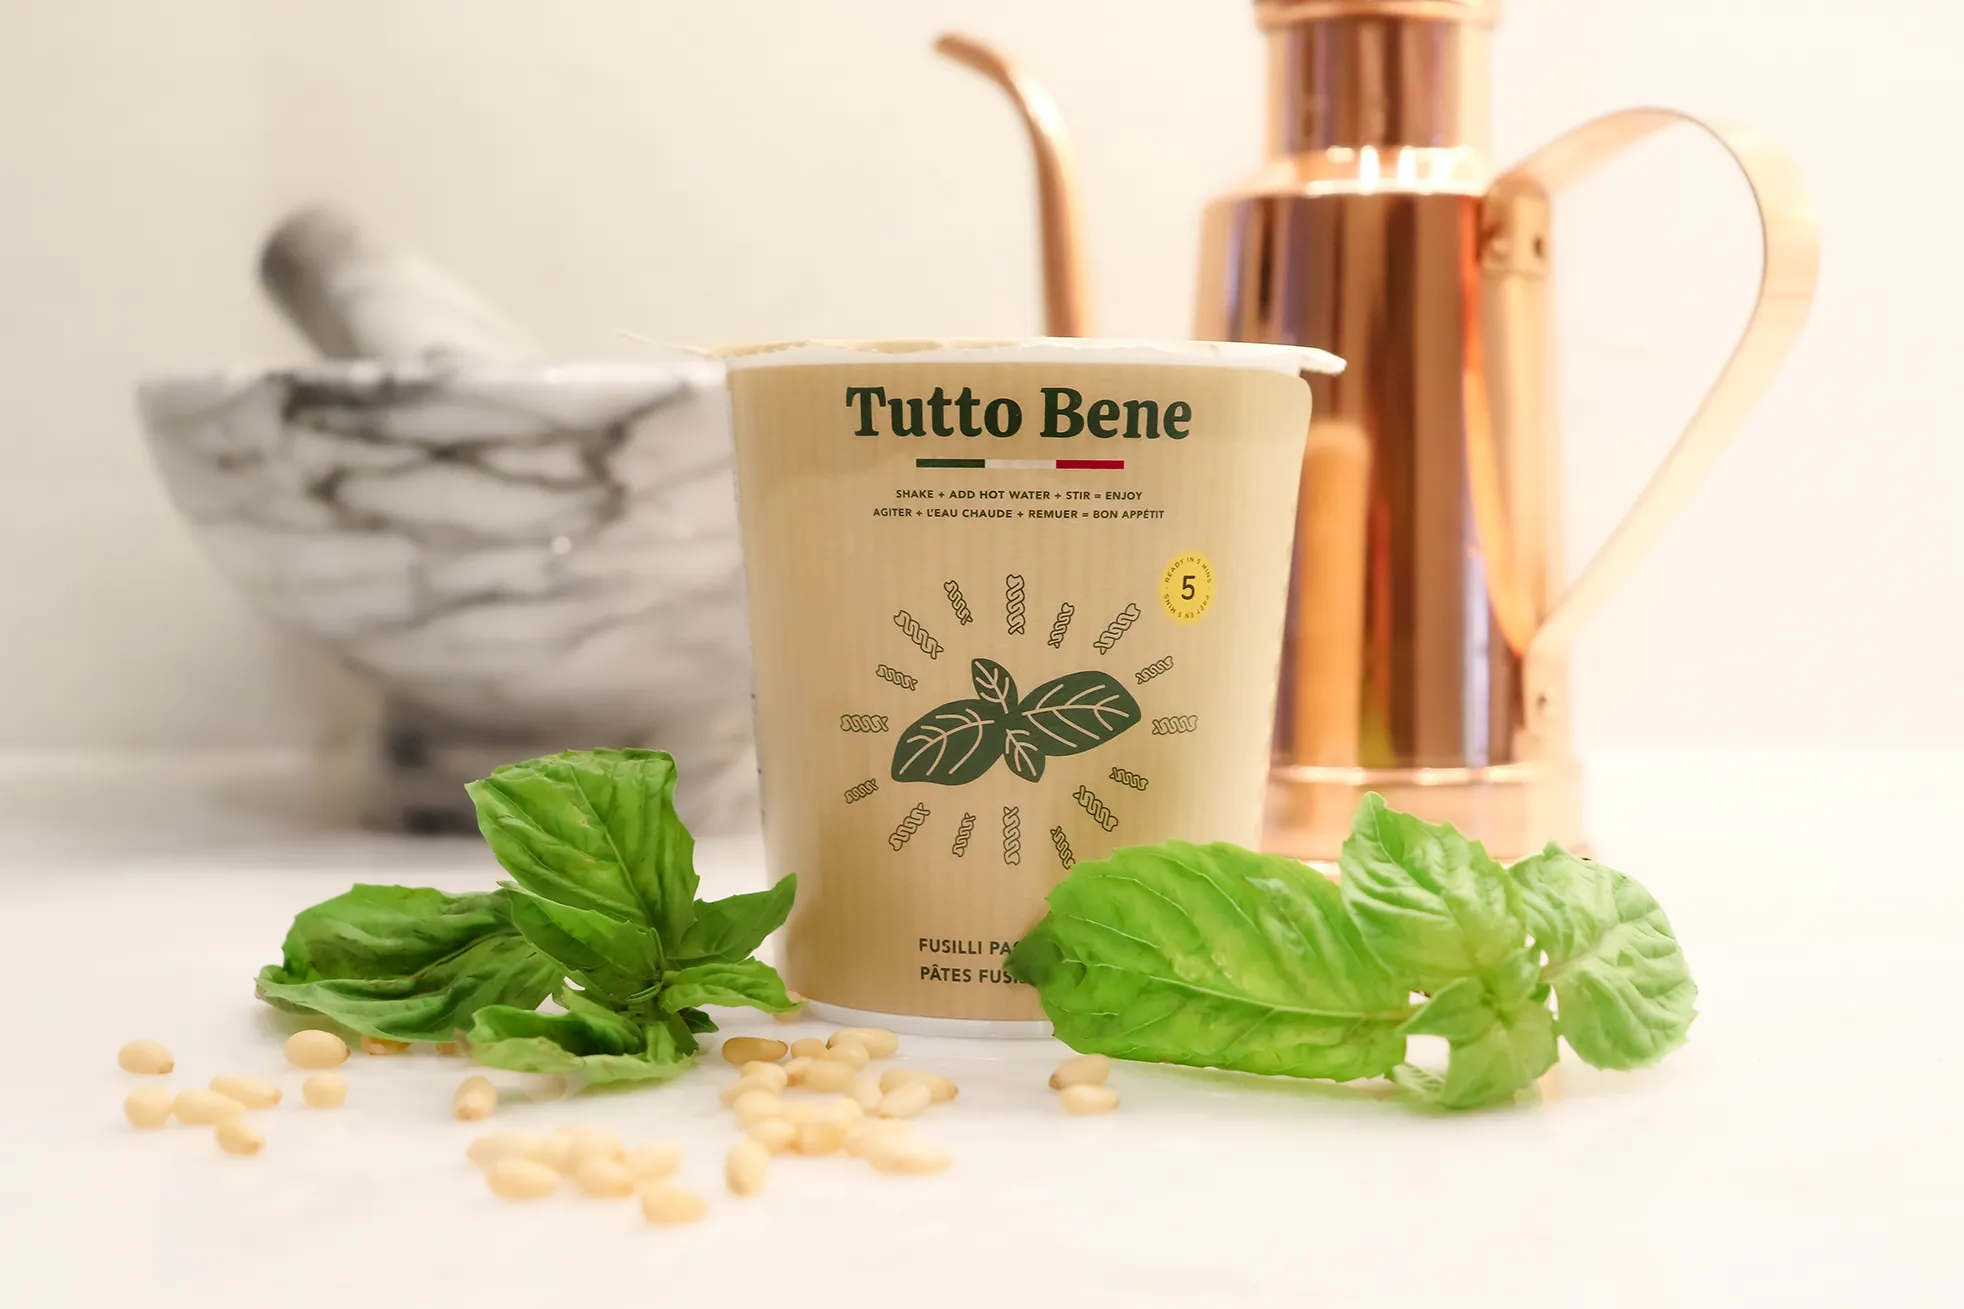 Basil and Tutto Bene Cup